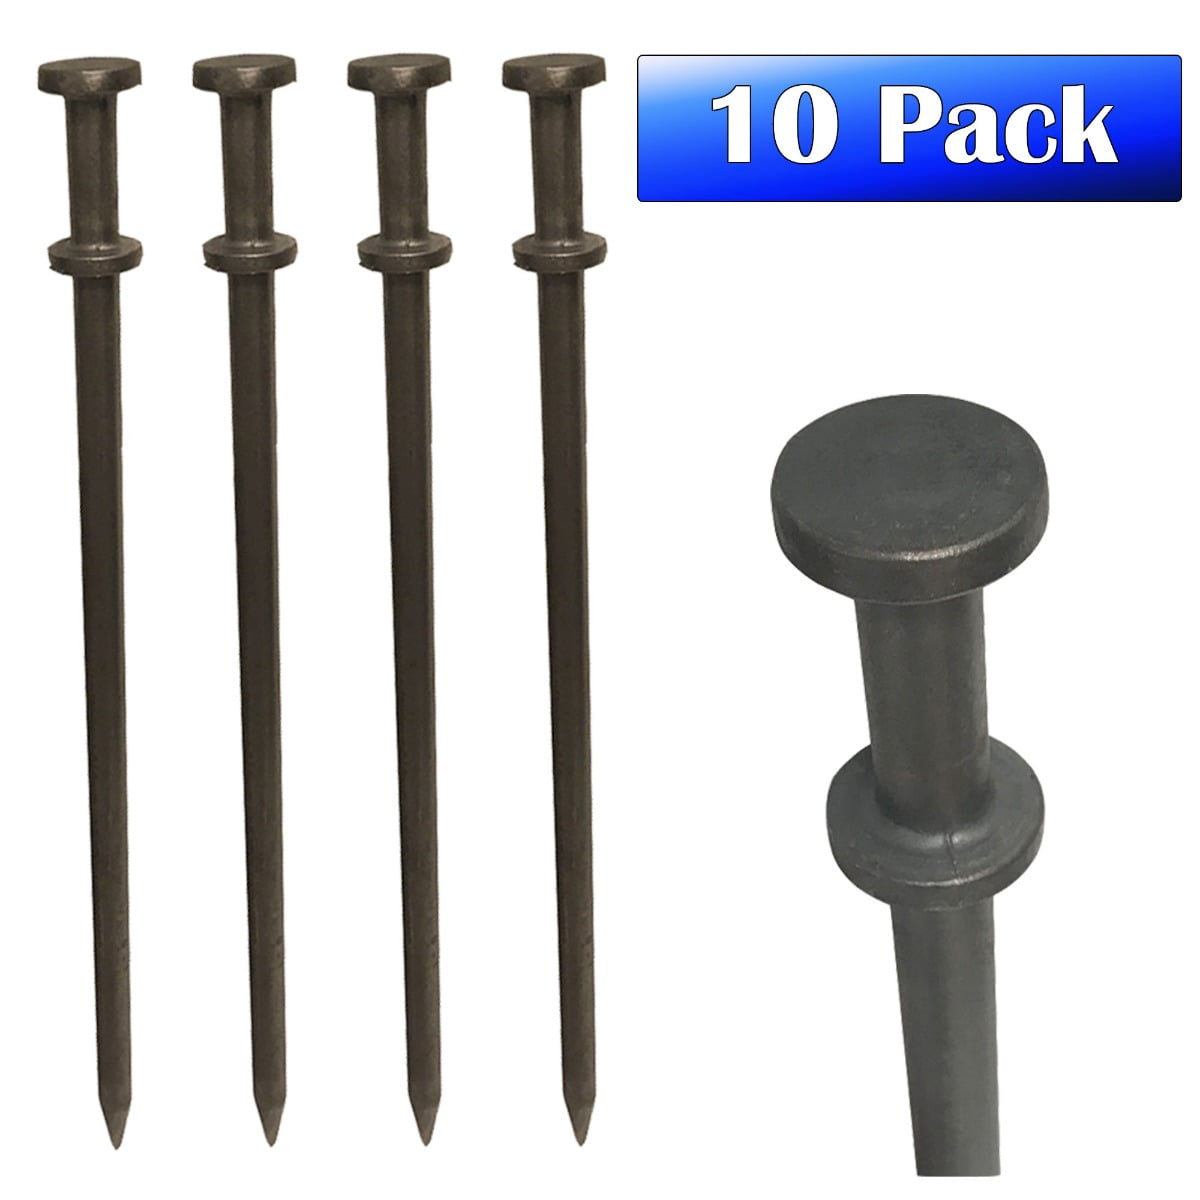 NEW-Coleman The Outdoor Company Heavy Duty Tent Stakes 4 pack 10" 